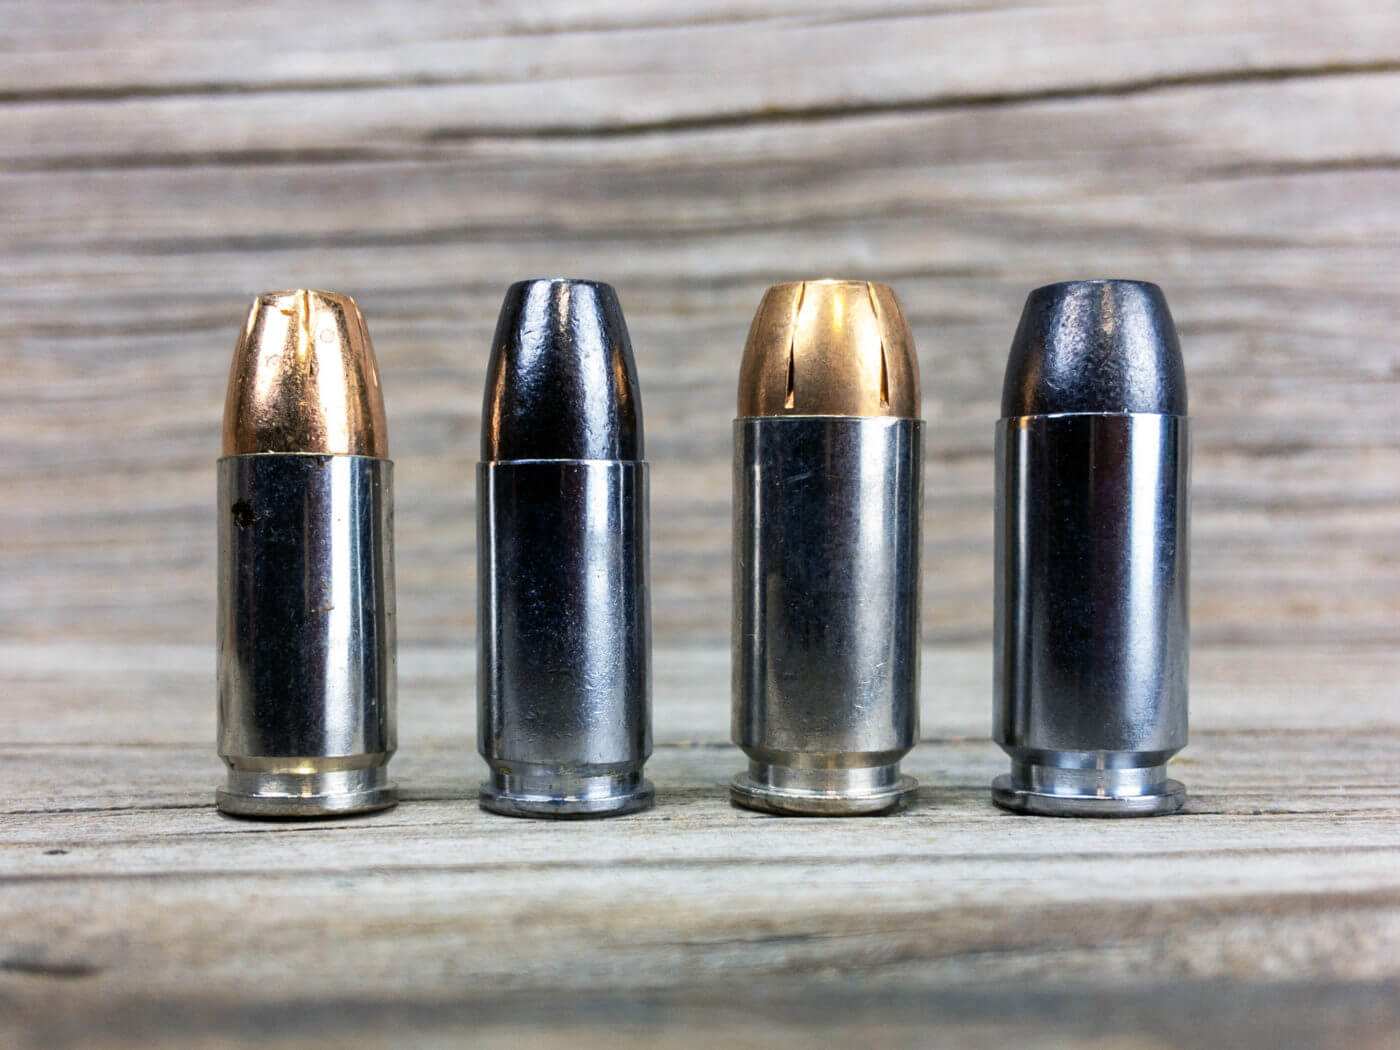 Two 9mm cartridges and two .40 caliber cartridges